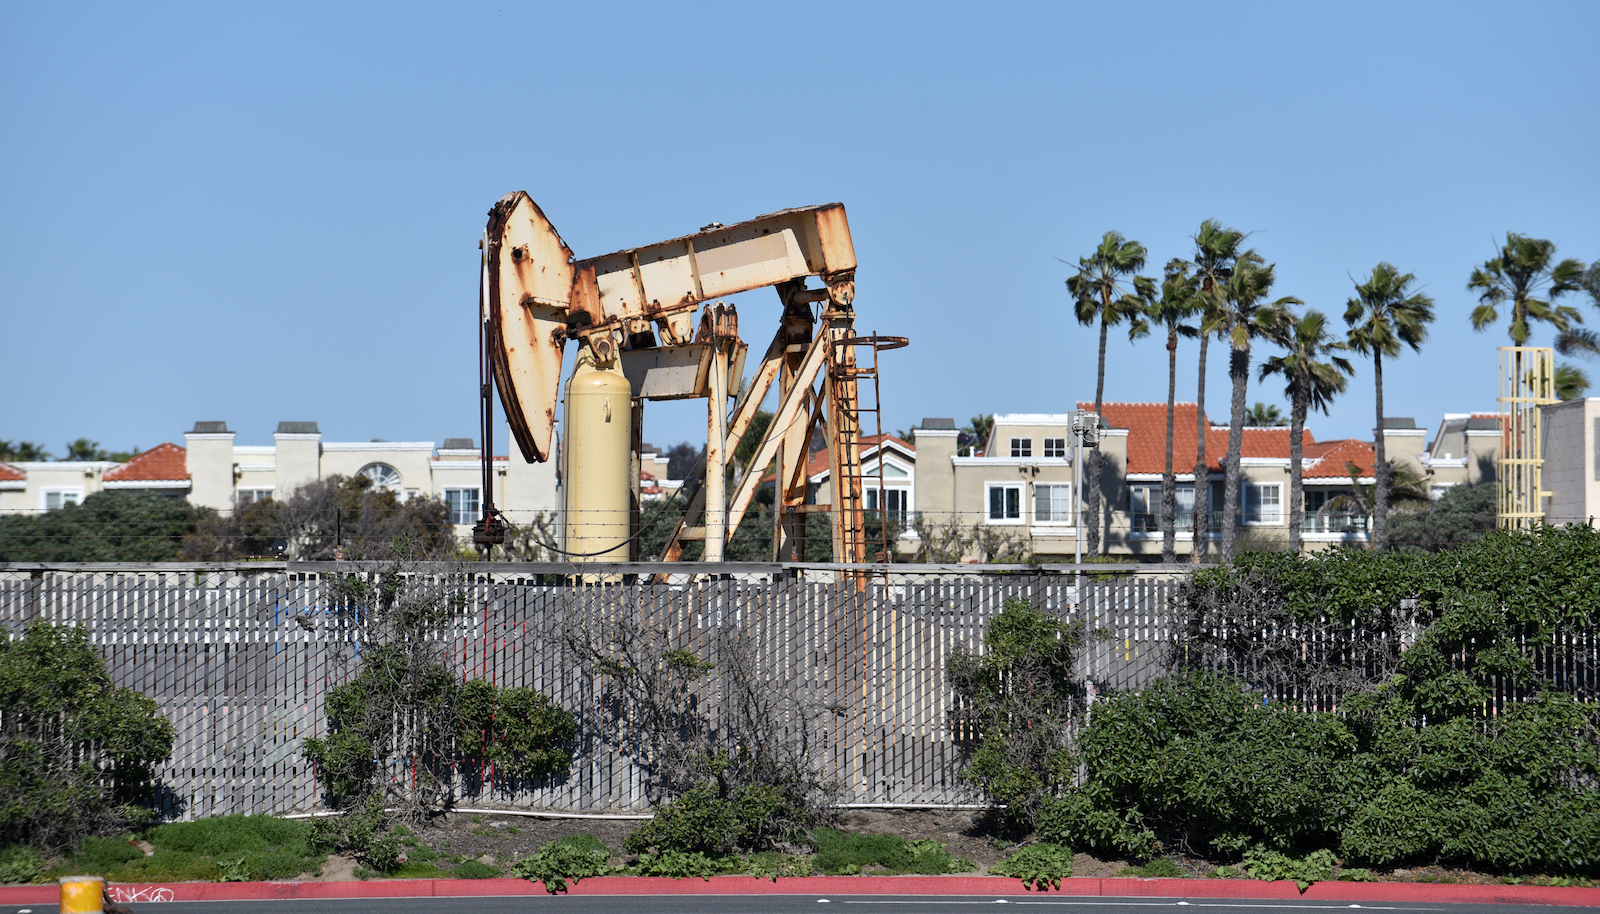 An oil pump jack in a residential area in Southern California